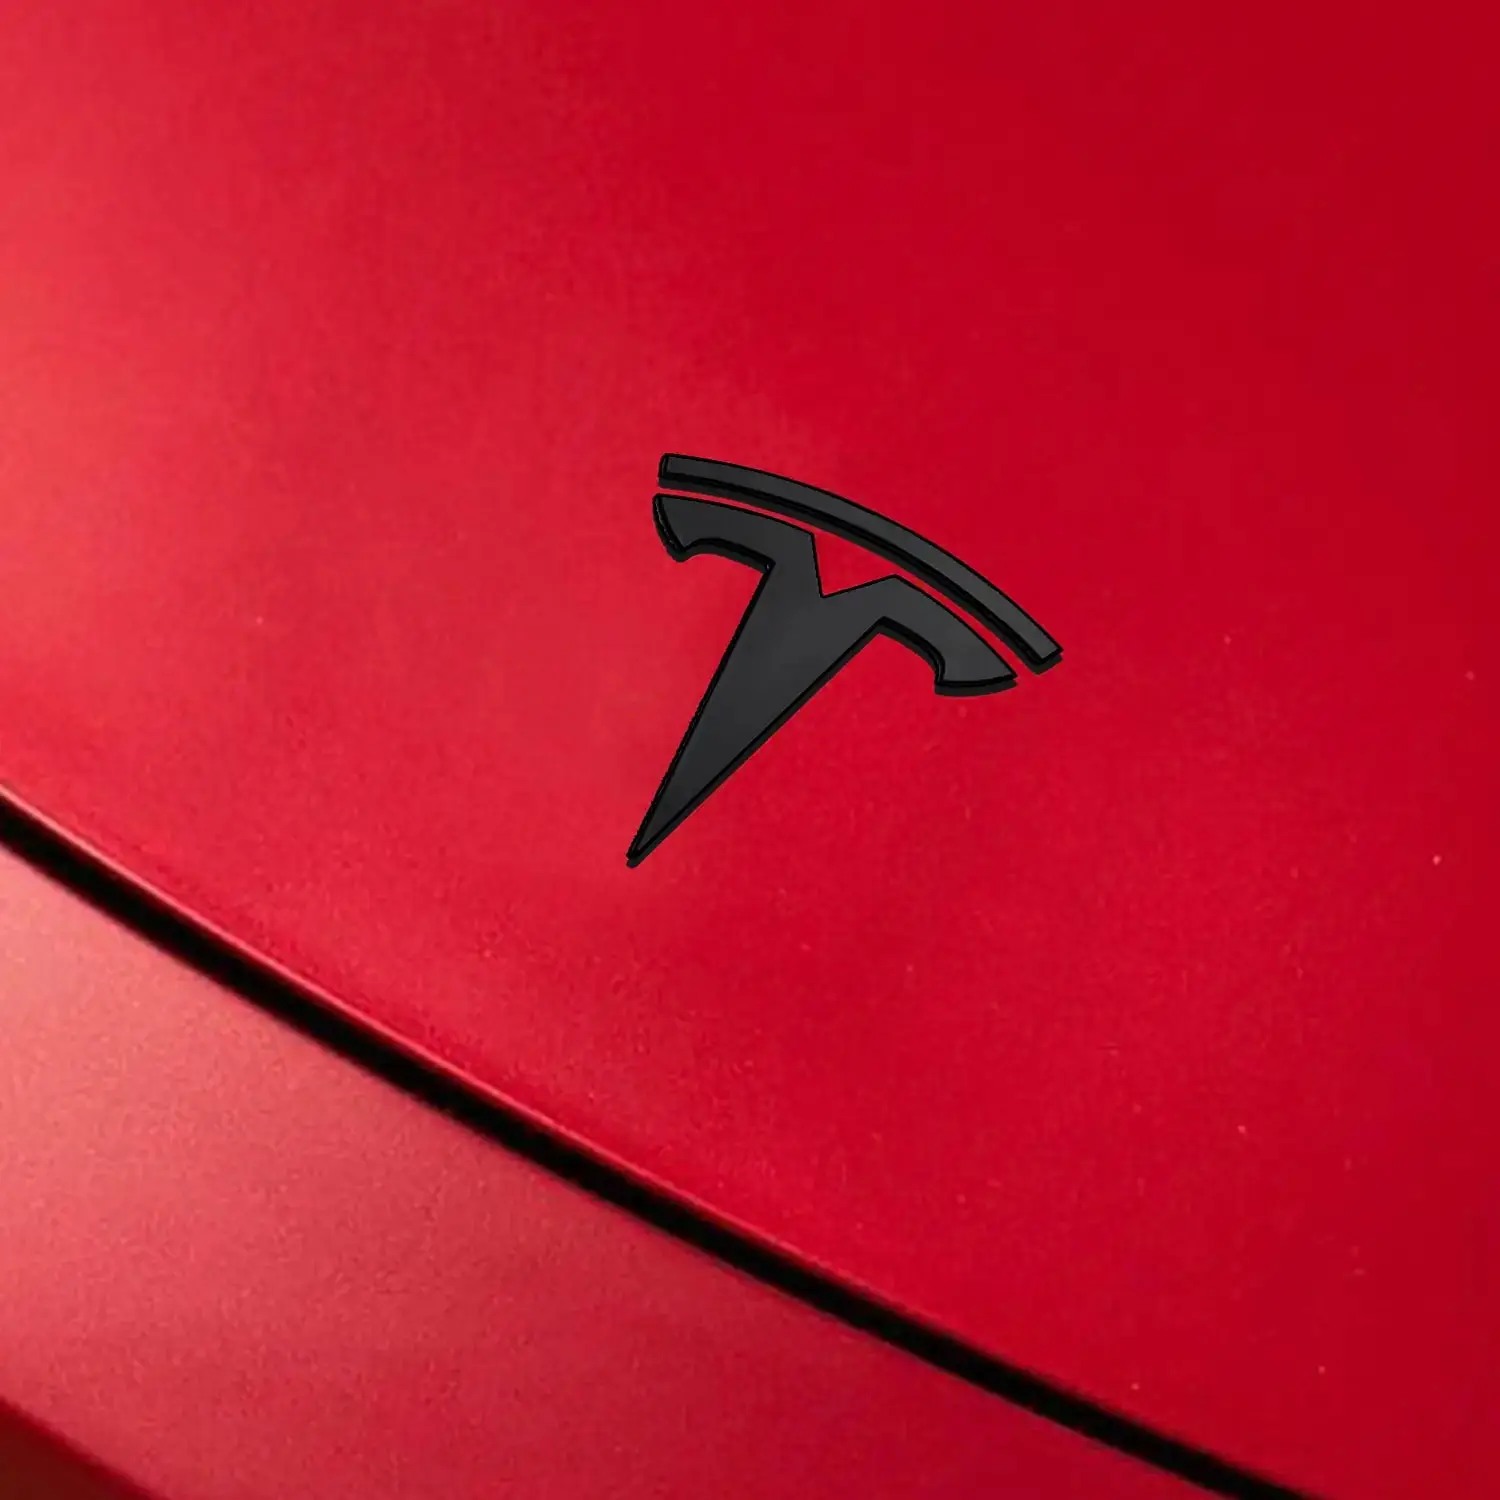 Protect and Customize Your Trunk and Frunk with Adreama's 2 Pack of Tesla Model Y ABS T Logo Decal Covers